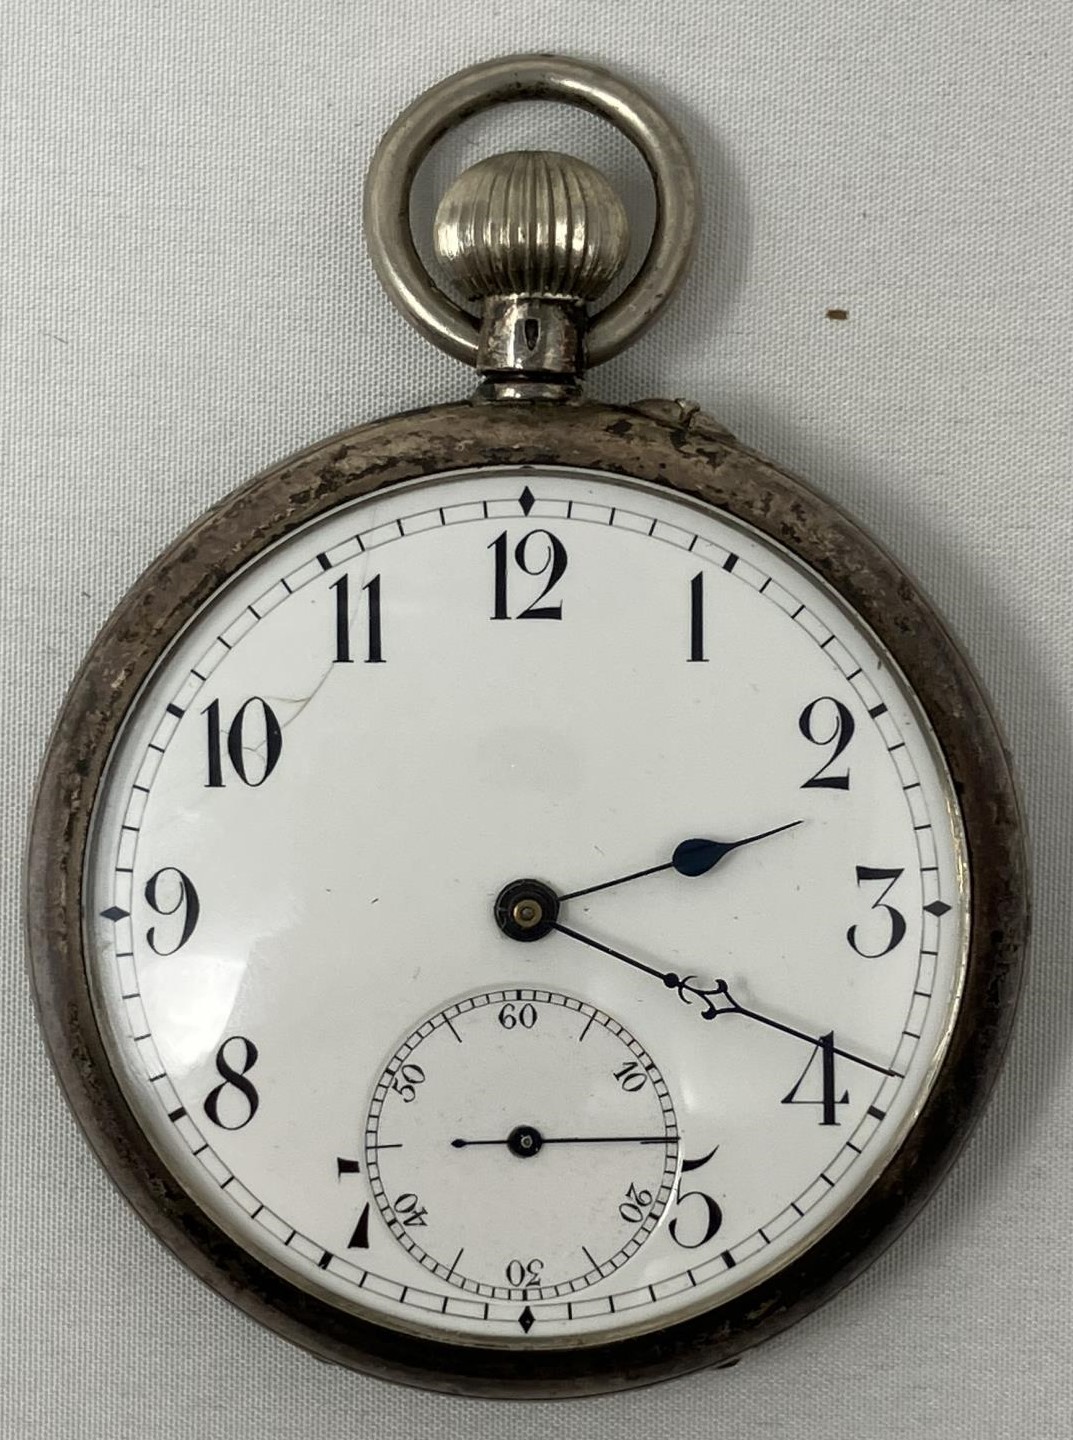 A silver coloured metal open face pocket watch